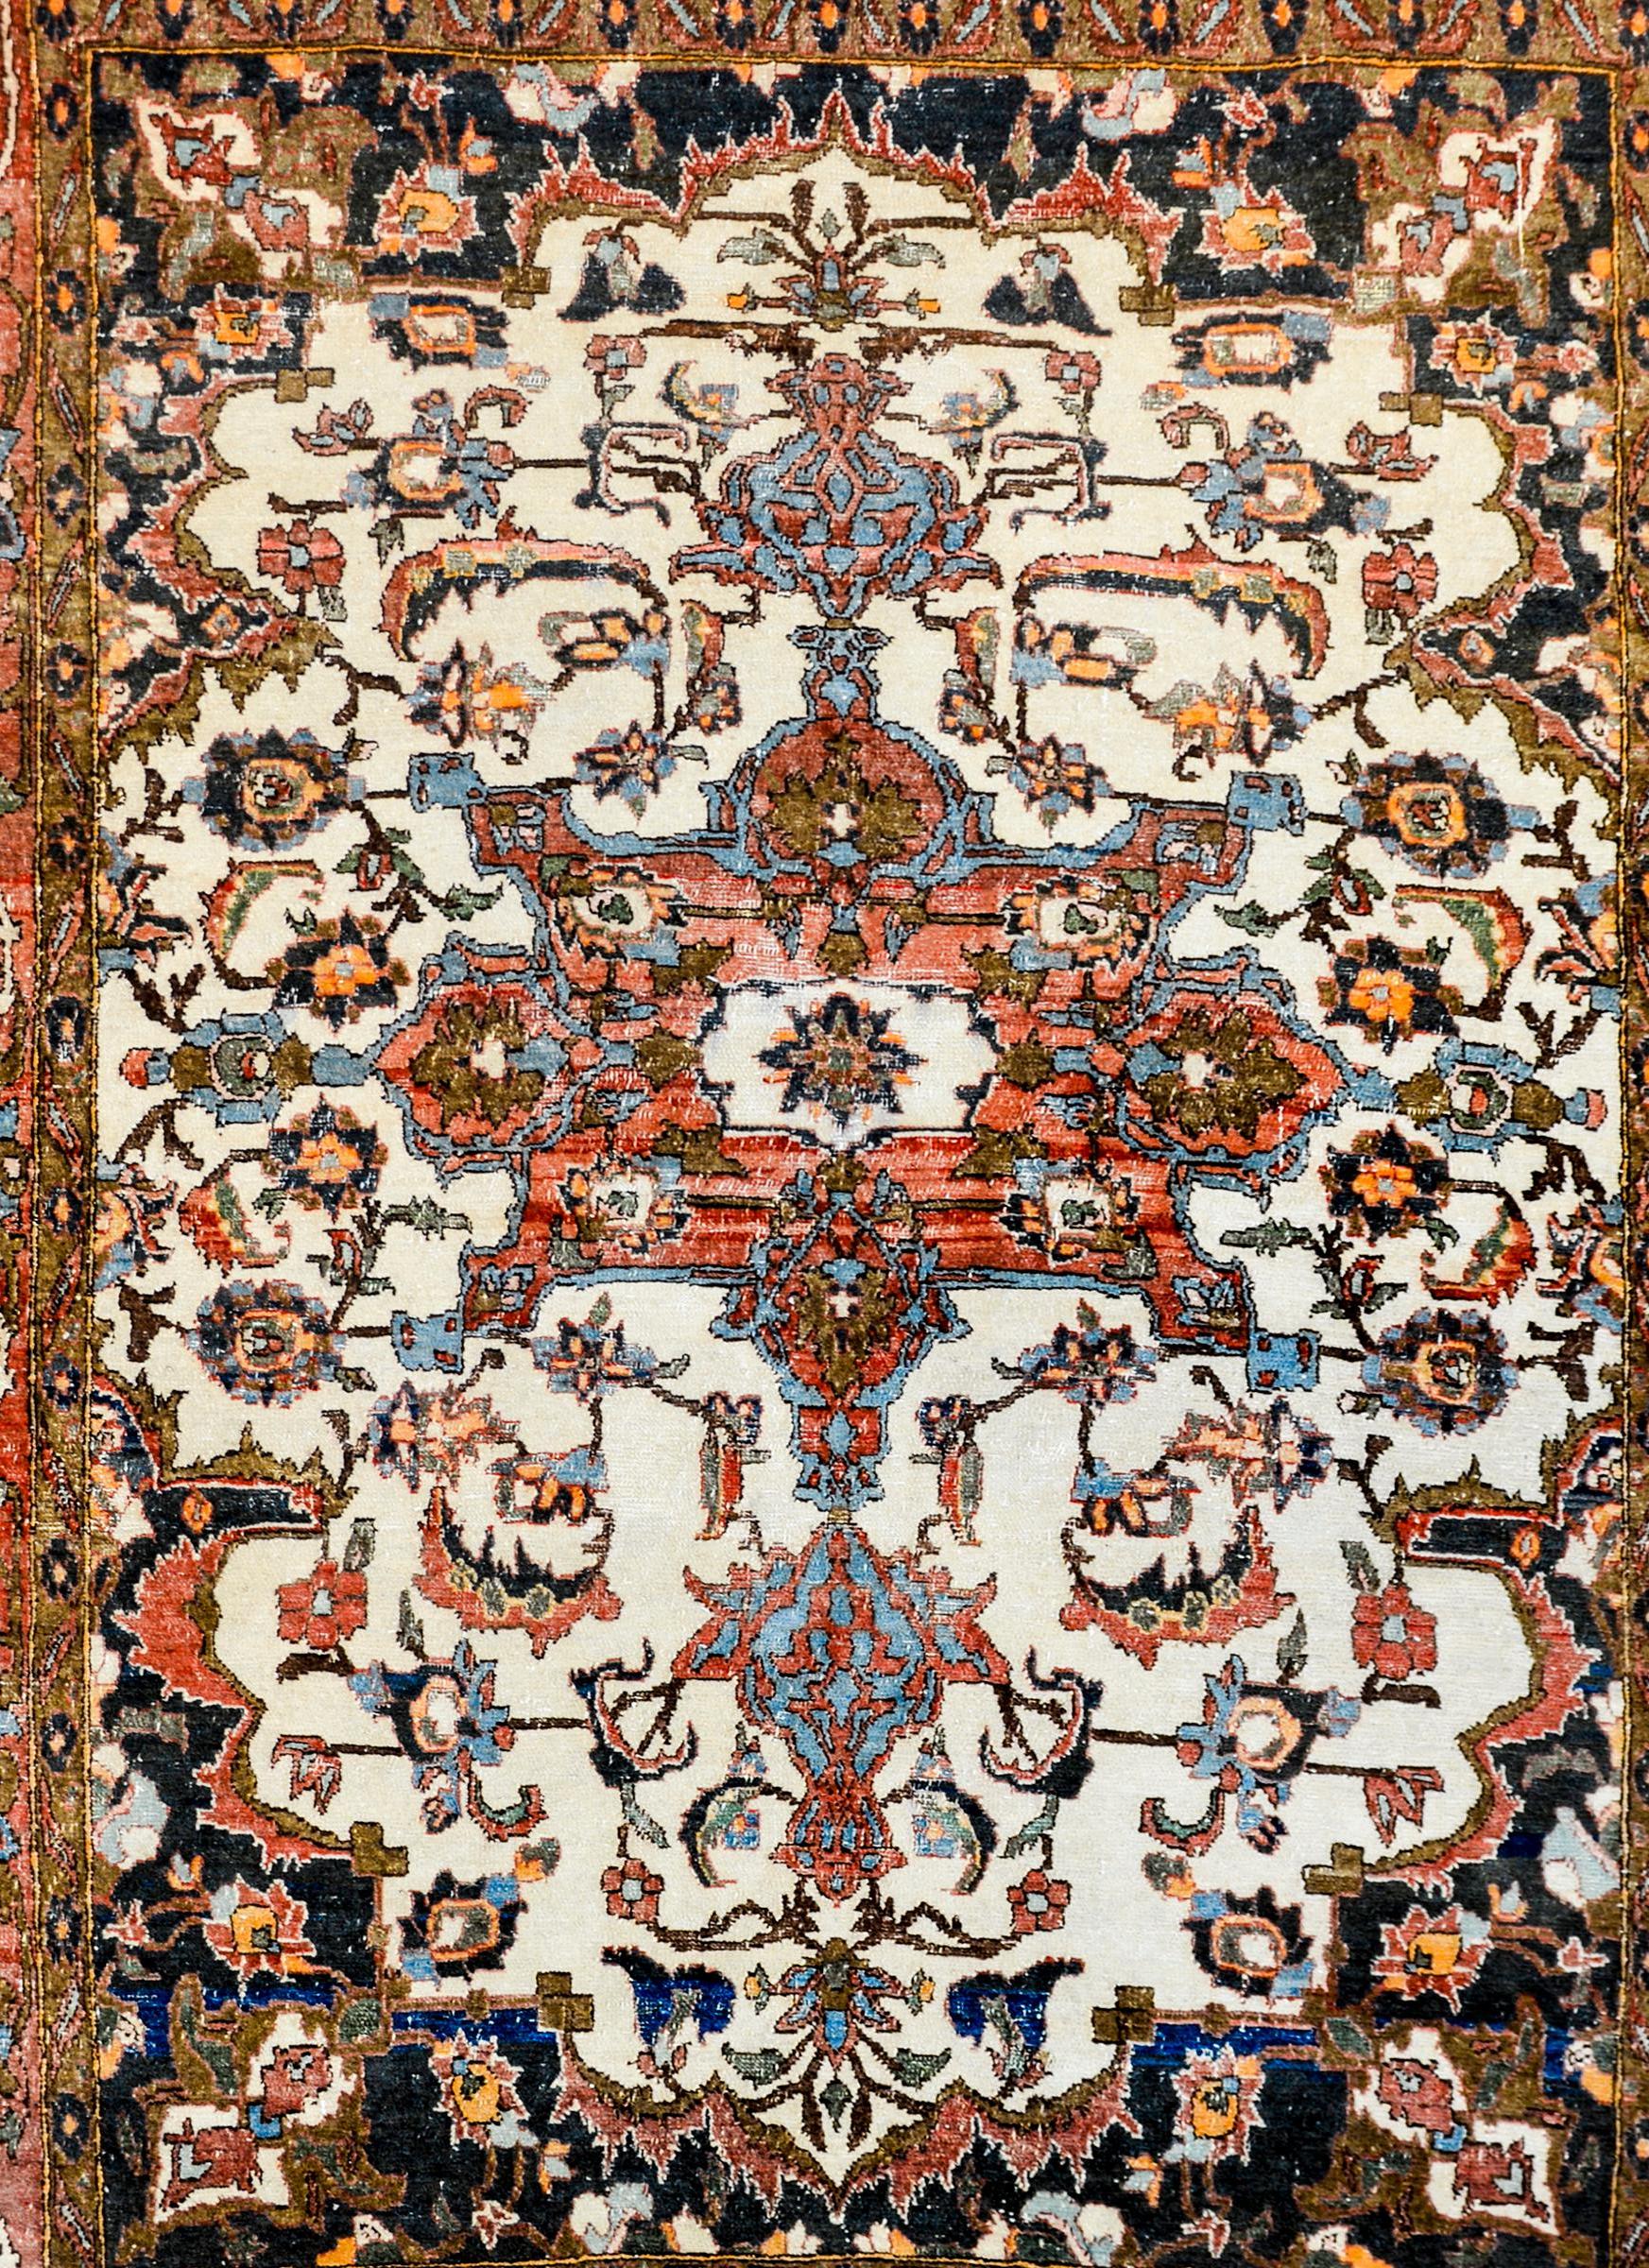 An exquisite early 20th century Persian Malayer rug with an extraordinary all-over trellis pattern with scrolling vines and large-scale flowers woven in crimson, light and dark indigo, gold, pink, and green vegetable dyed wool. The border is